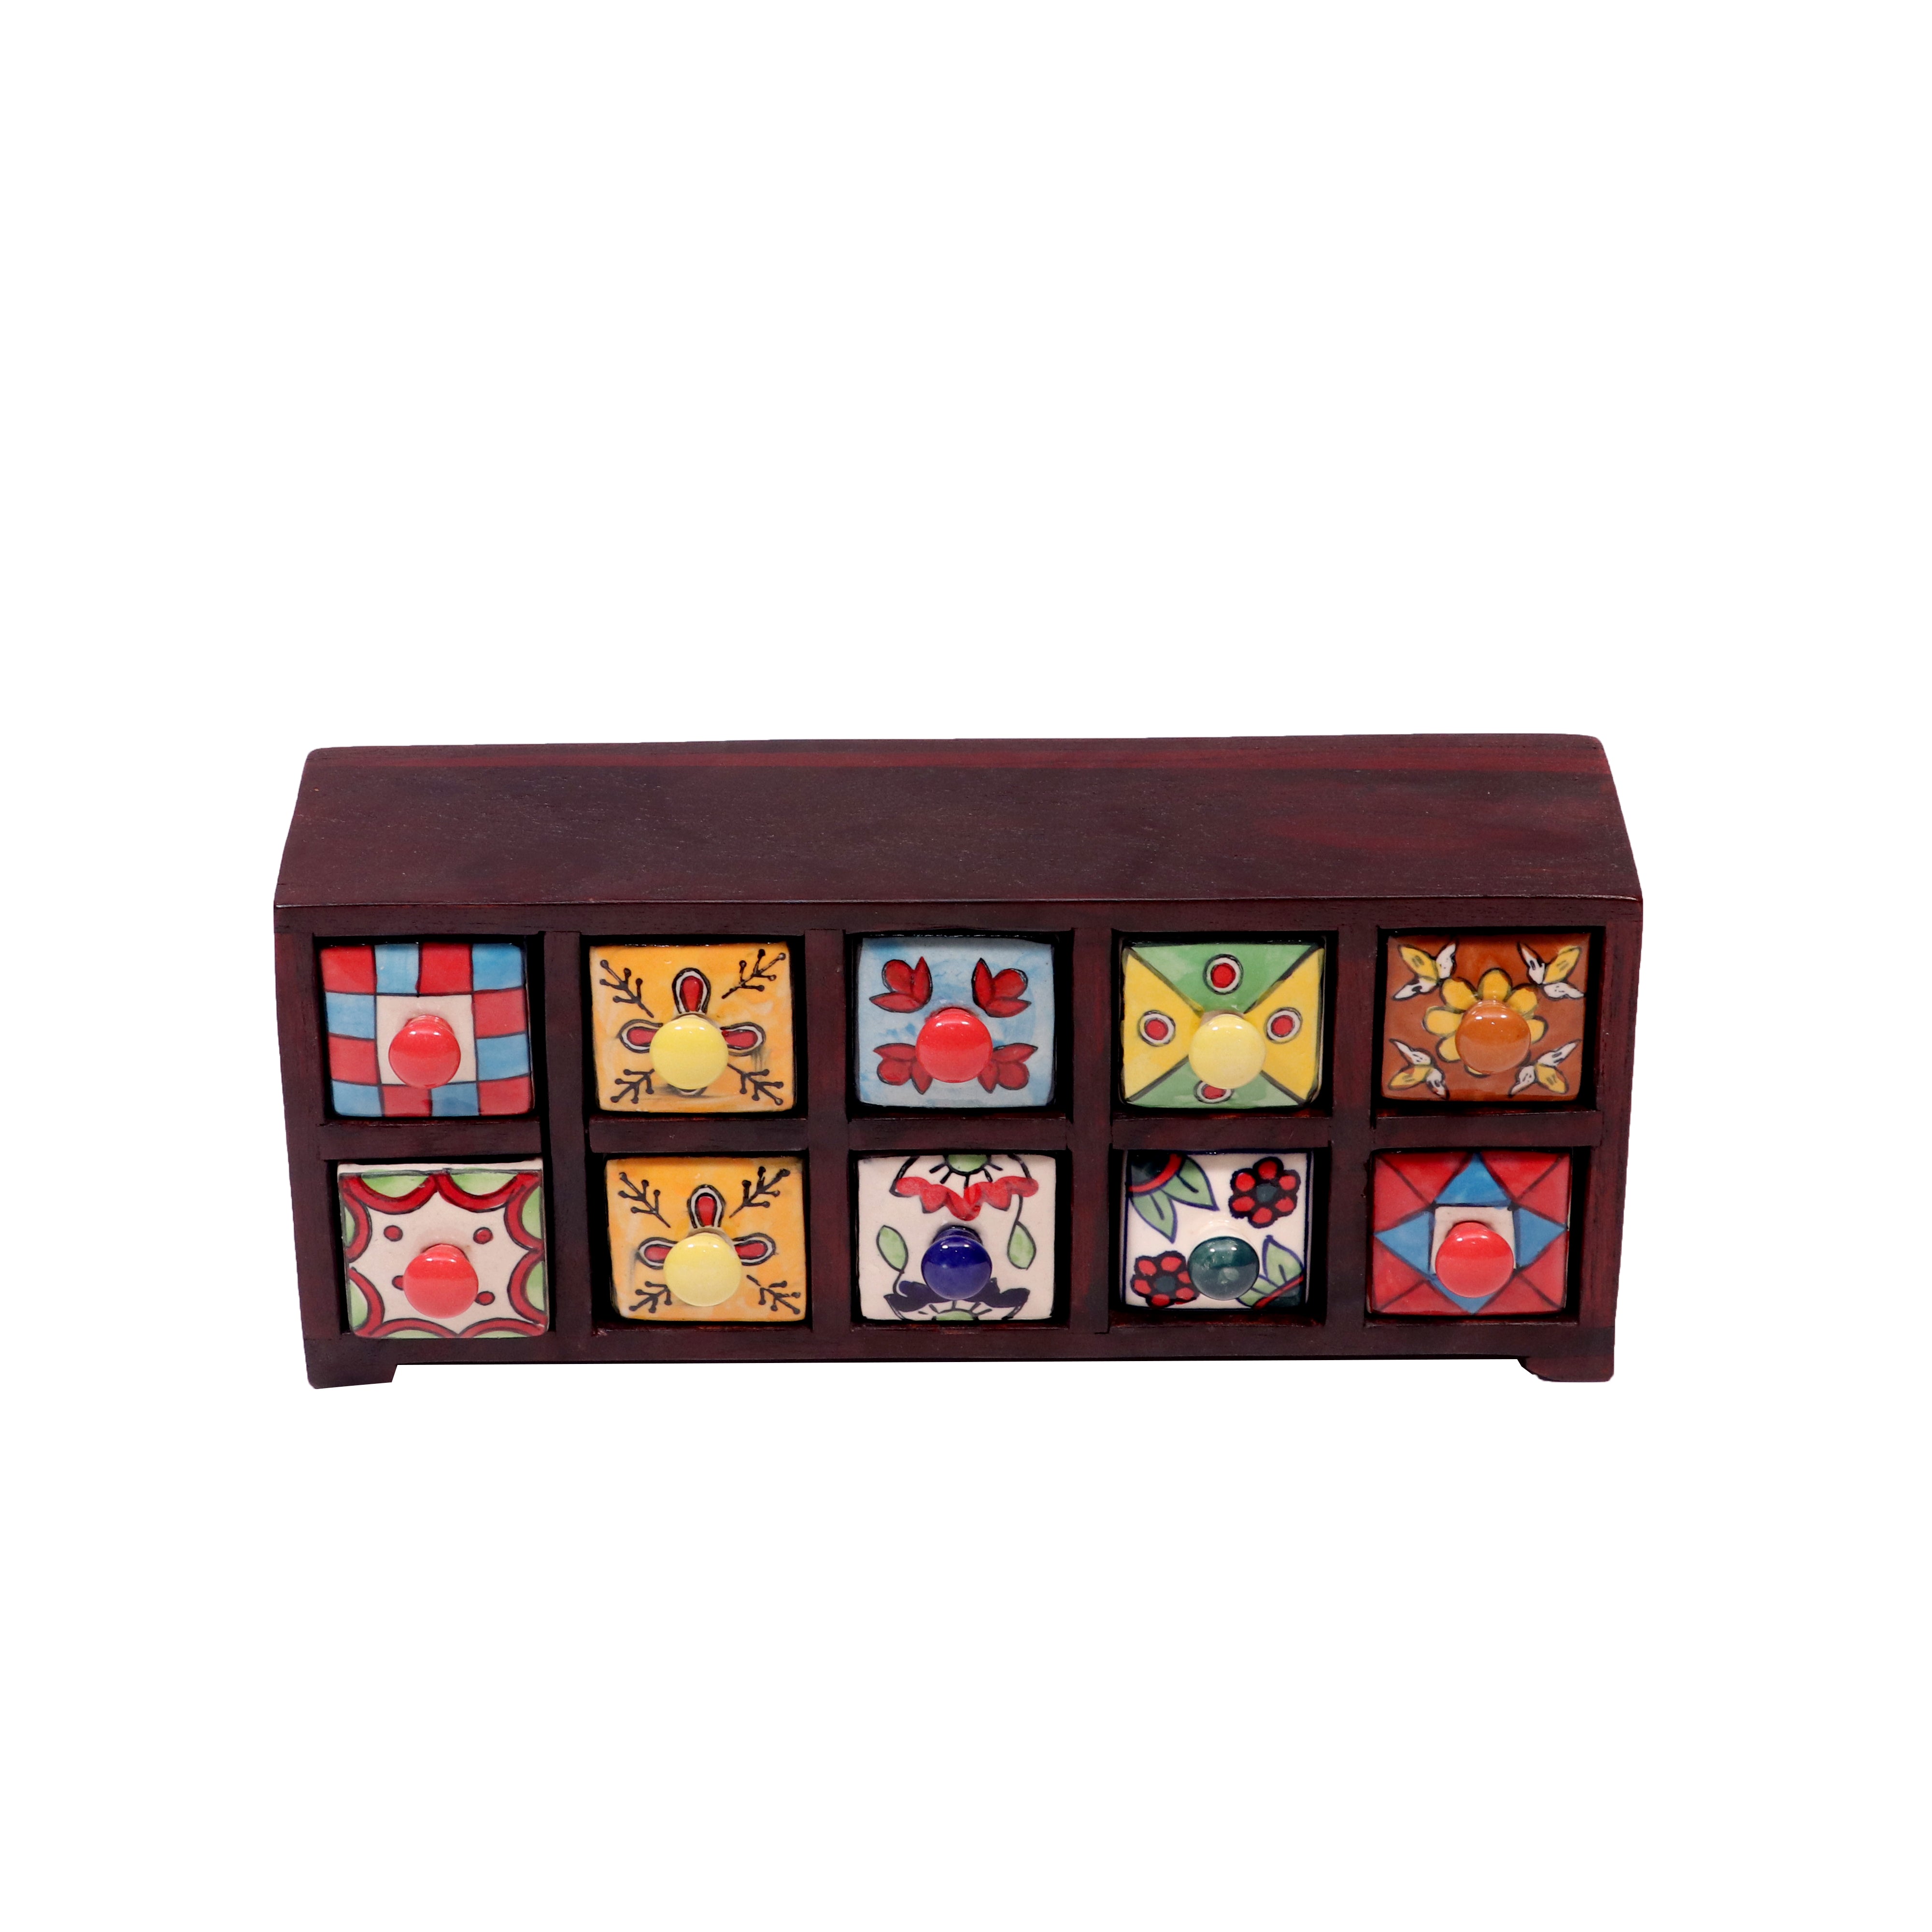 10 drawers double row ceramic miniature chest -(Mahogany Touch) Desk Organizer